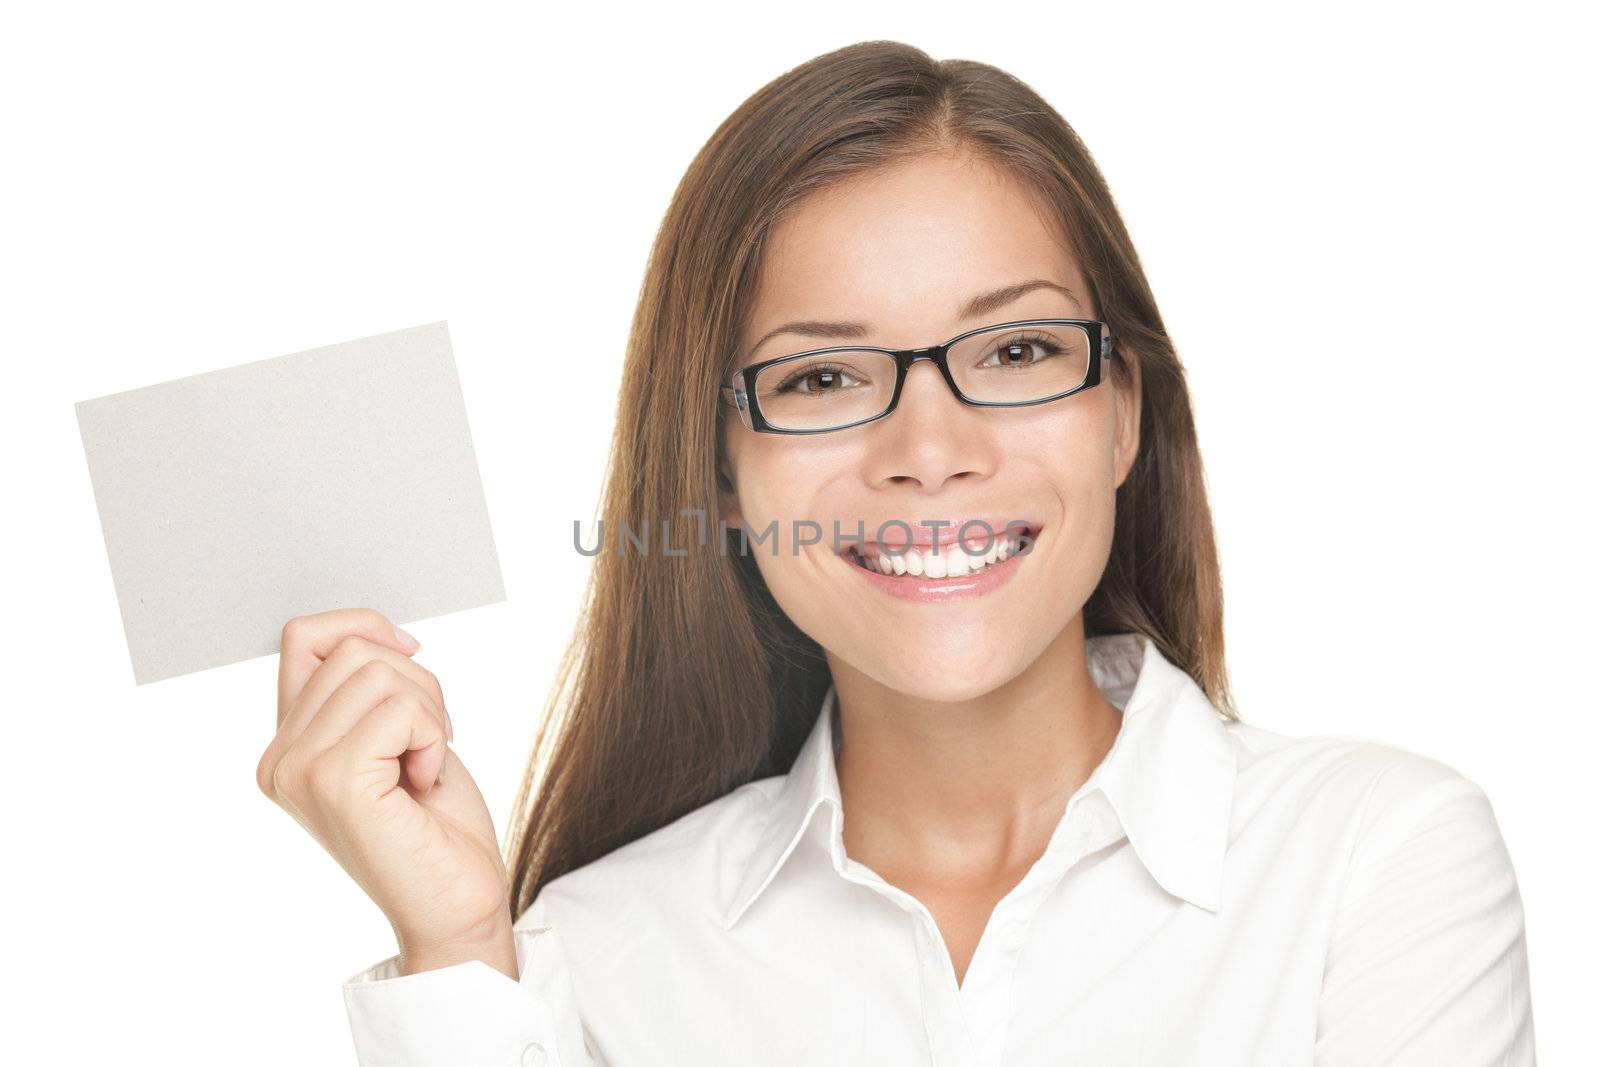 Woman showing blank sign smiling happy, Young casual professional with glasses showing empty card sign. Portrait of young professional Asian / Caucasian female model isolated on white background. 